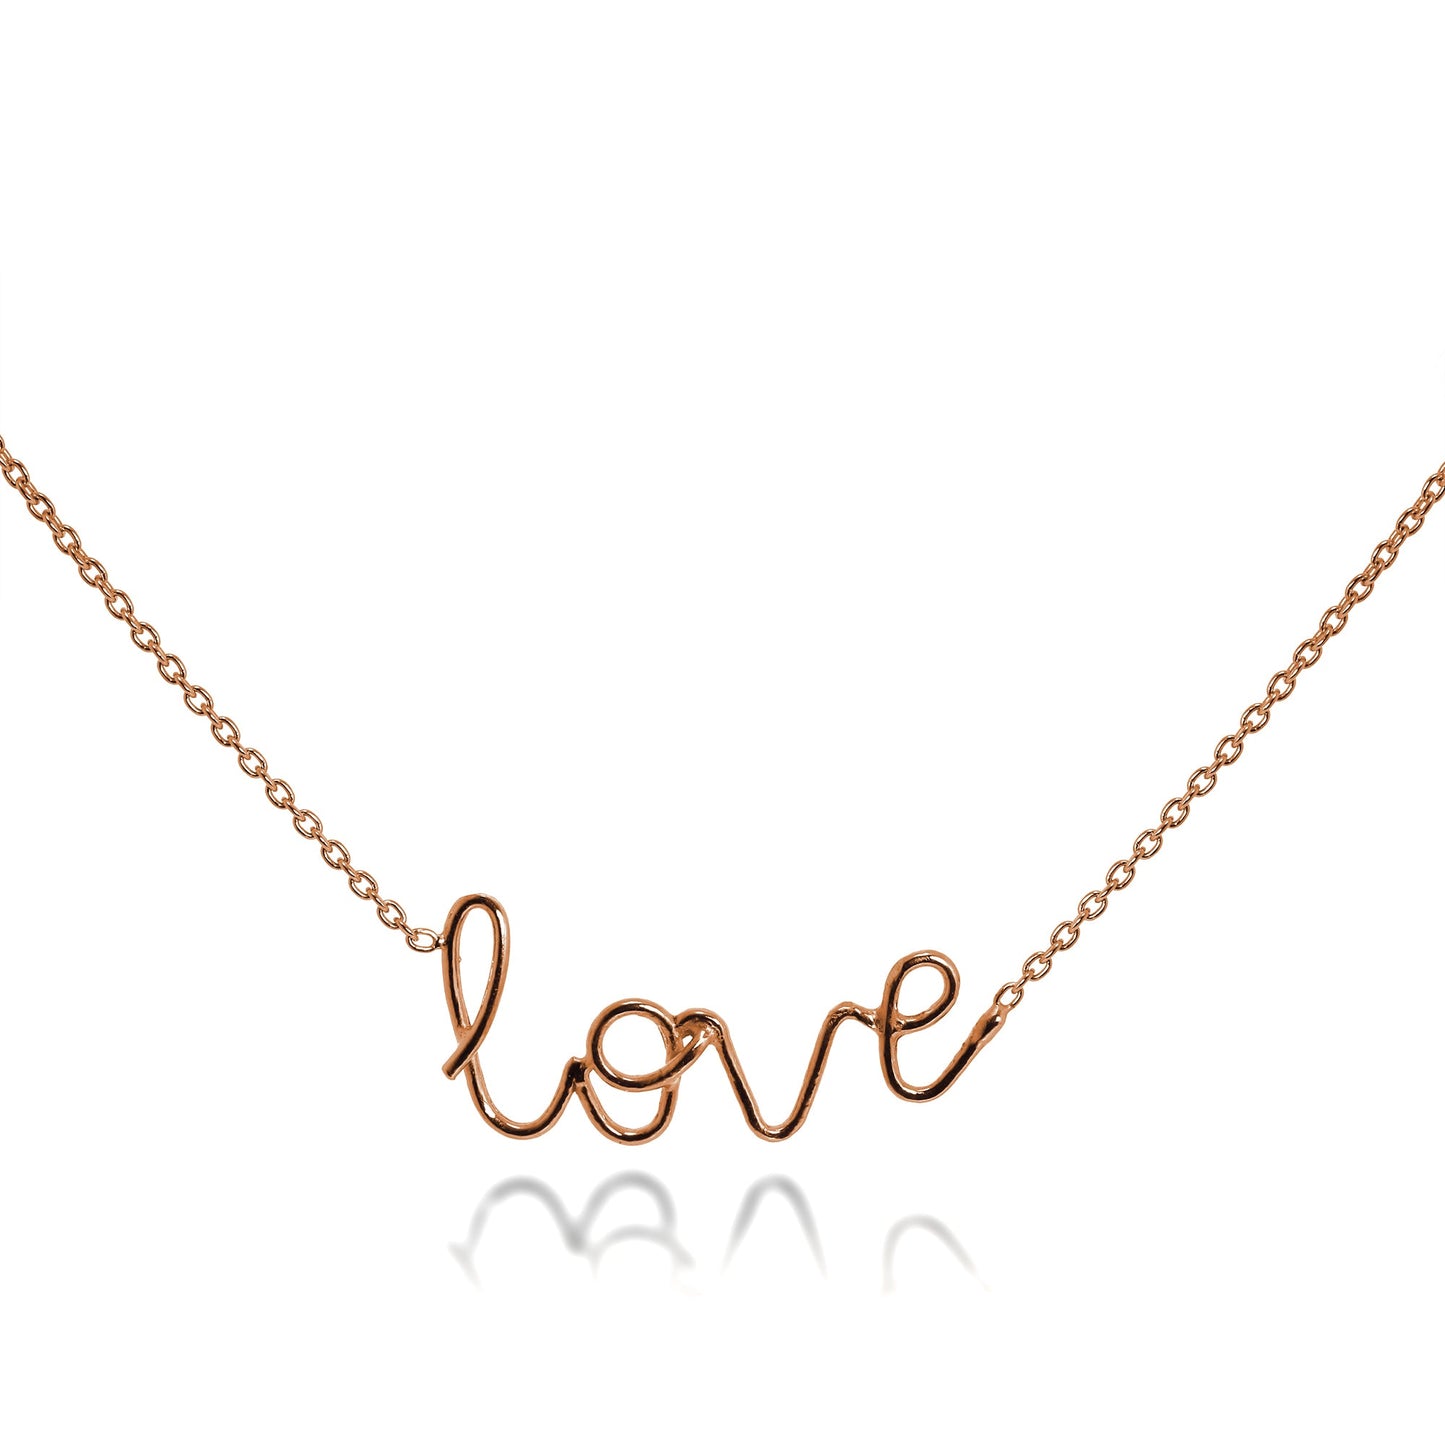 Rose Gold Plated Sterling Silver Love Necklace 16+2 Inches